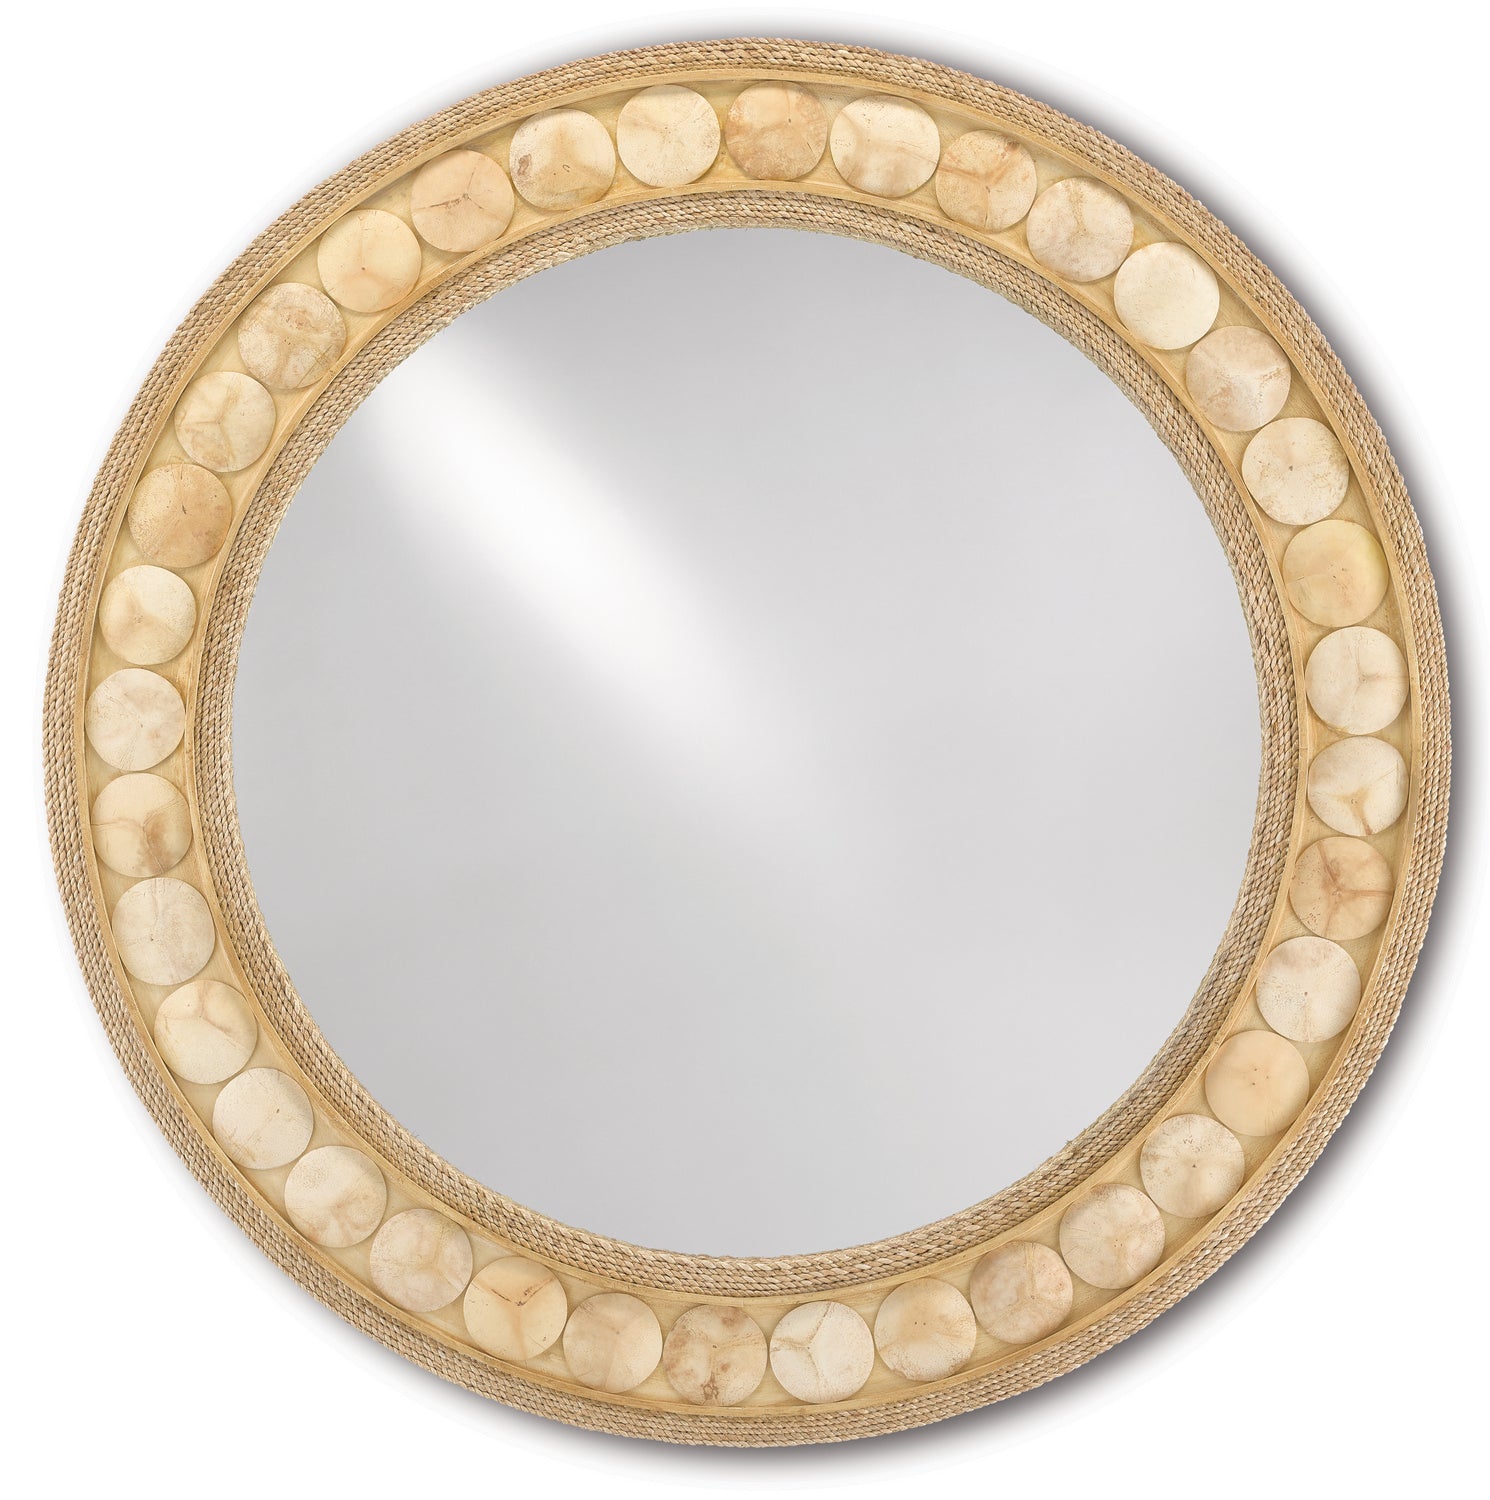 Mirror from the Buko collection in Straw/Natural Abaca Rope/Coco Shell/Mirror finish